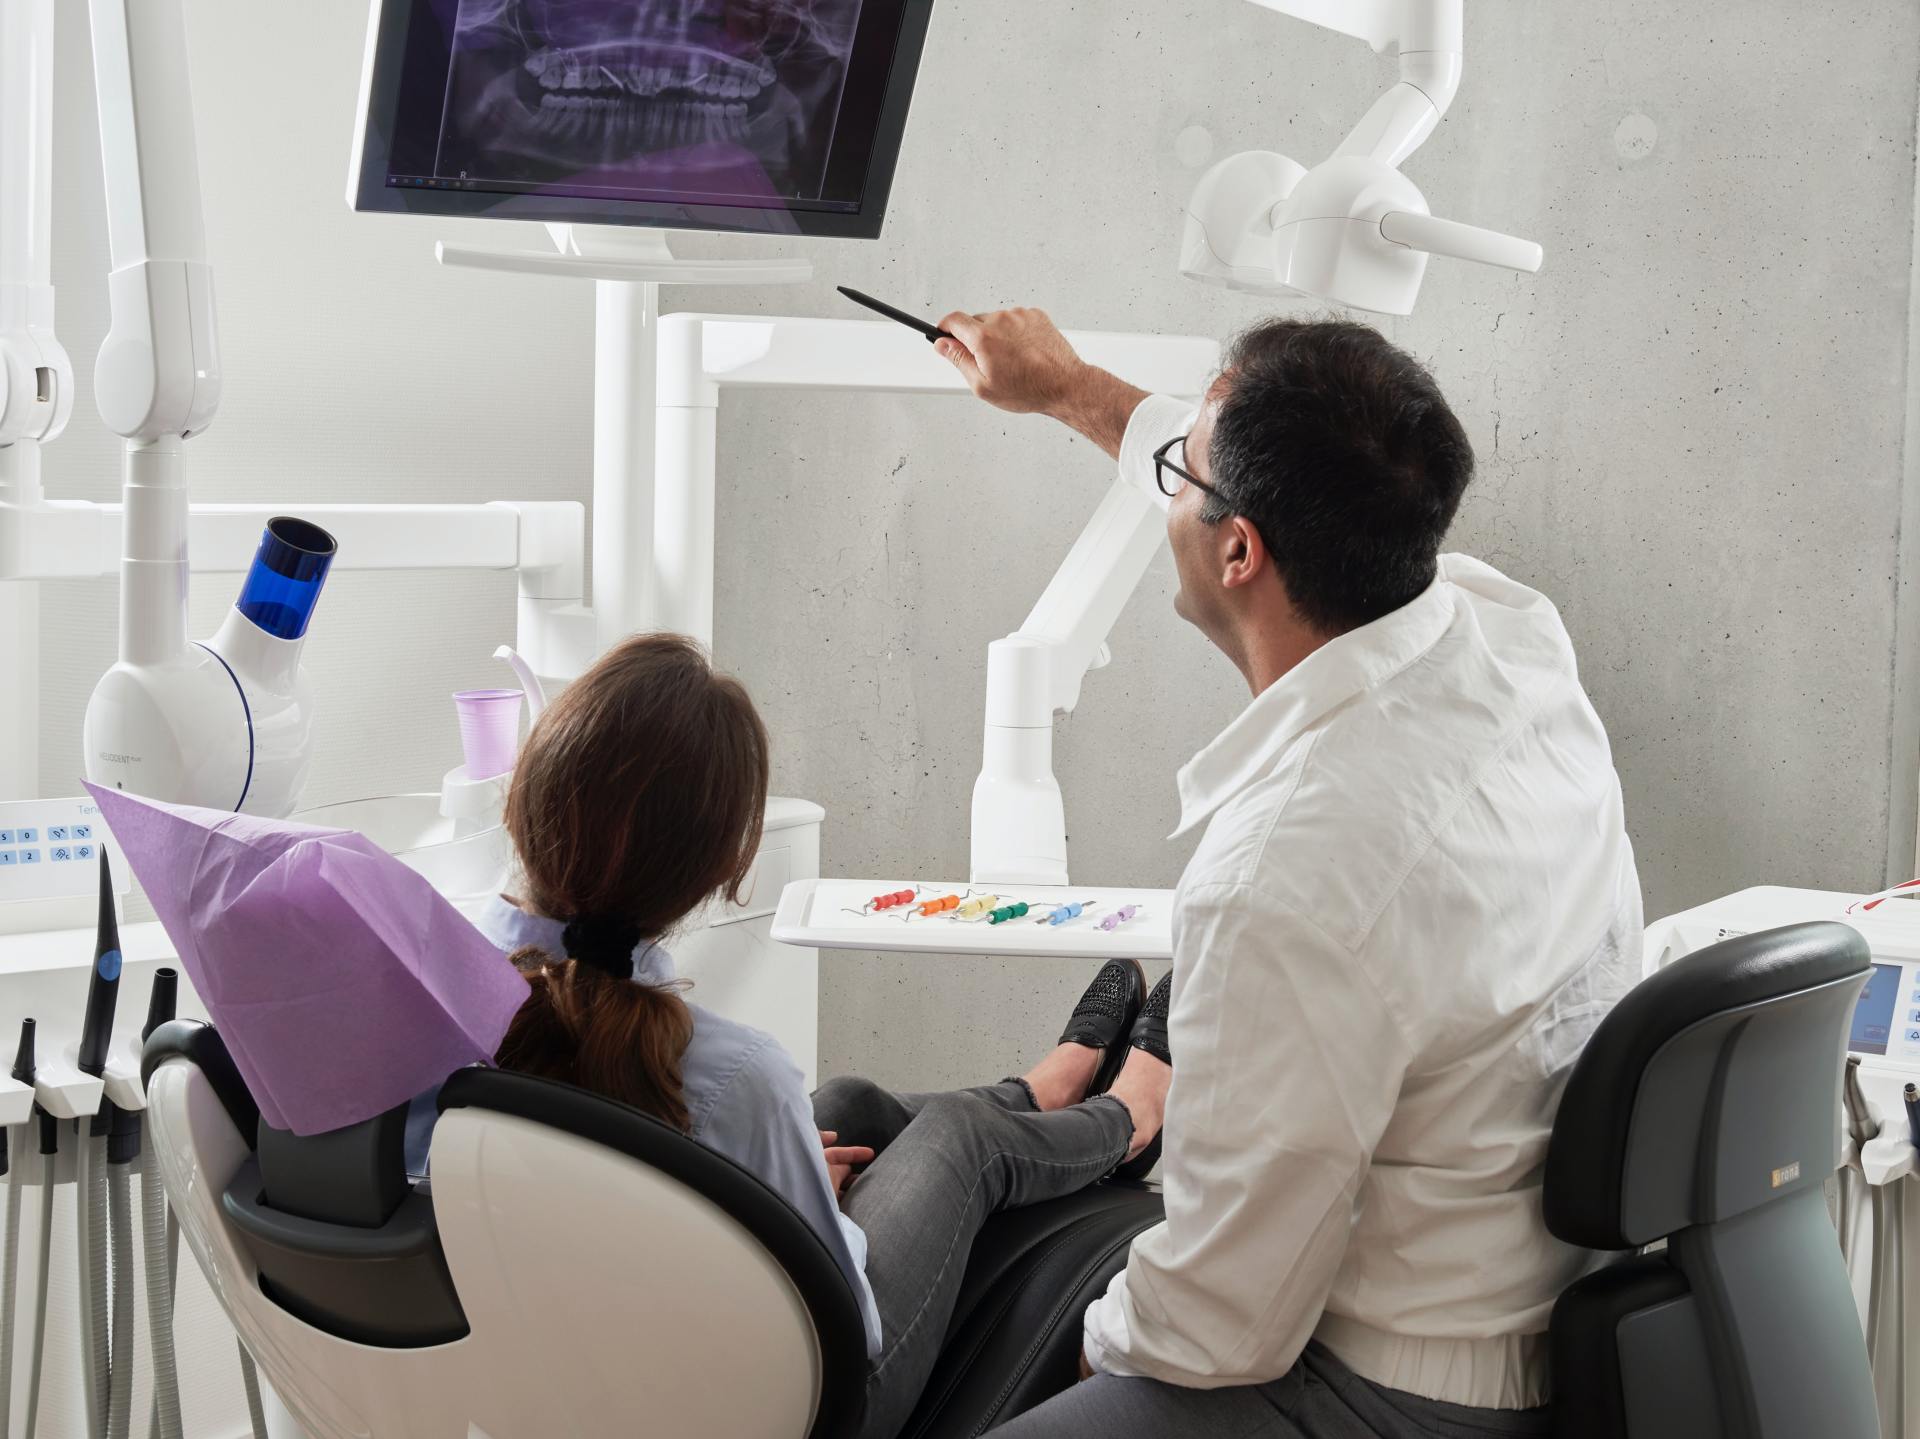 Young Adults Spending More on Dental Treatment - Dentistry Today